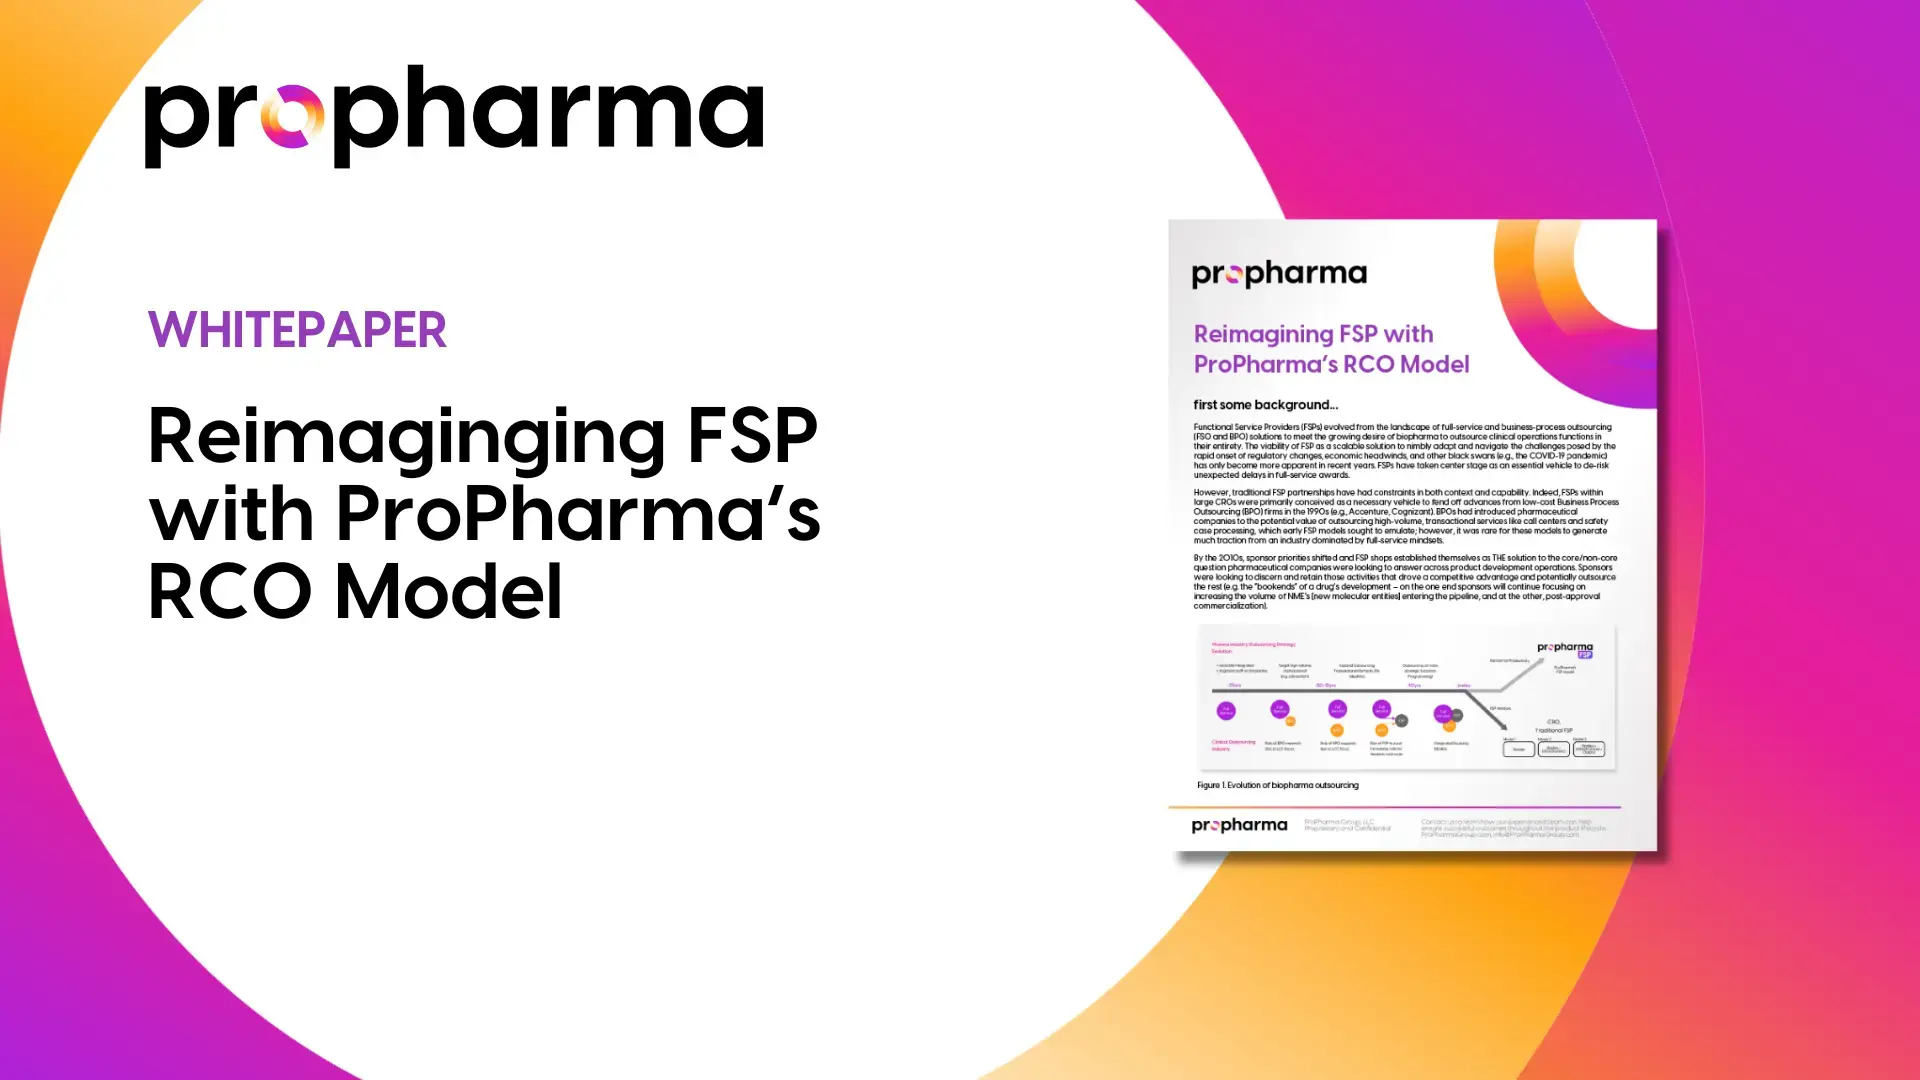 Reimagining FSP with ProPharma’s RCO Model